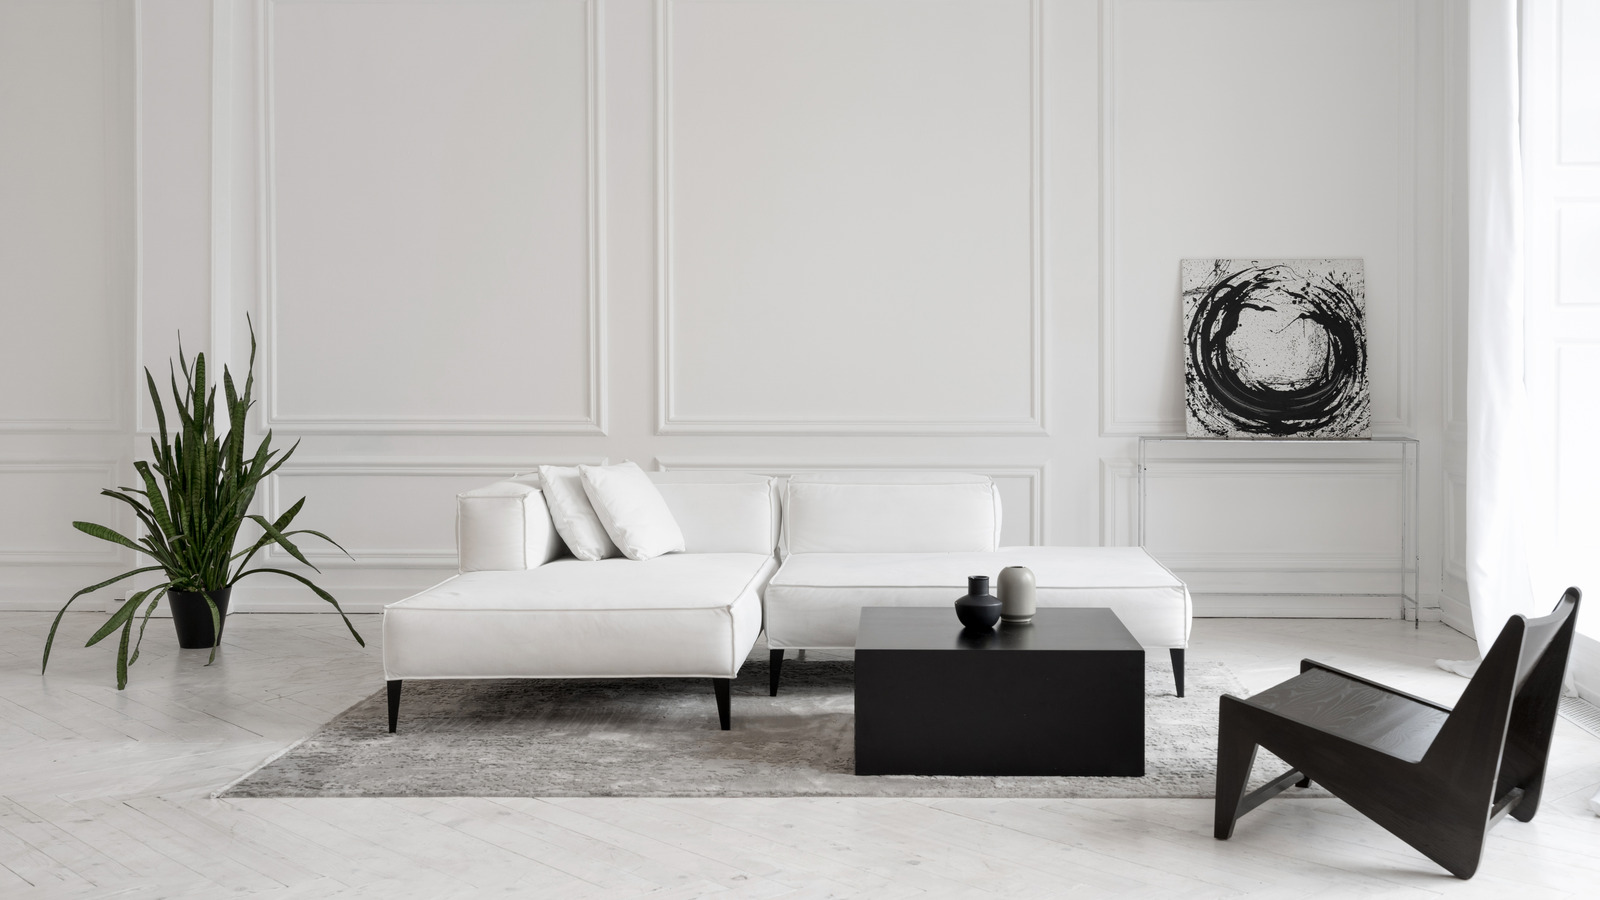 11 Minimalist Living Room Ideas to Simplify Your Space